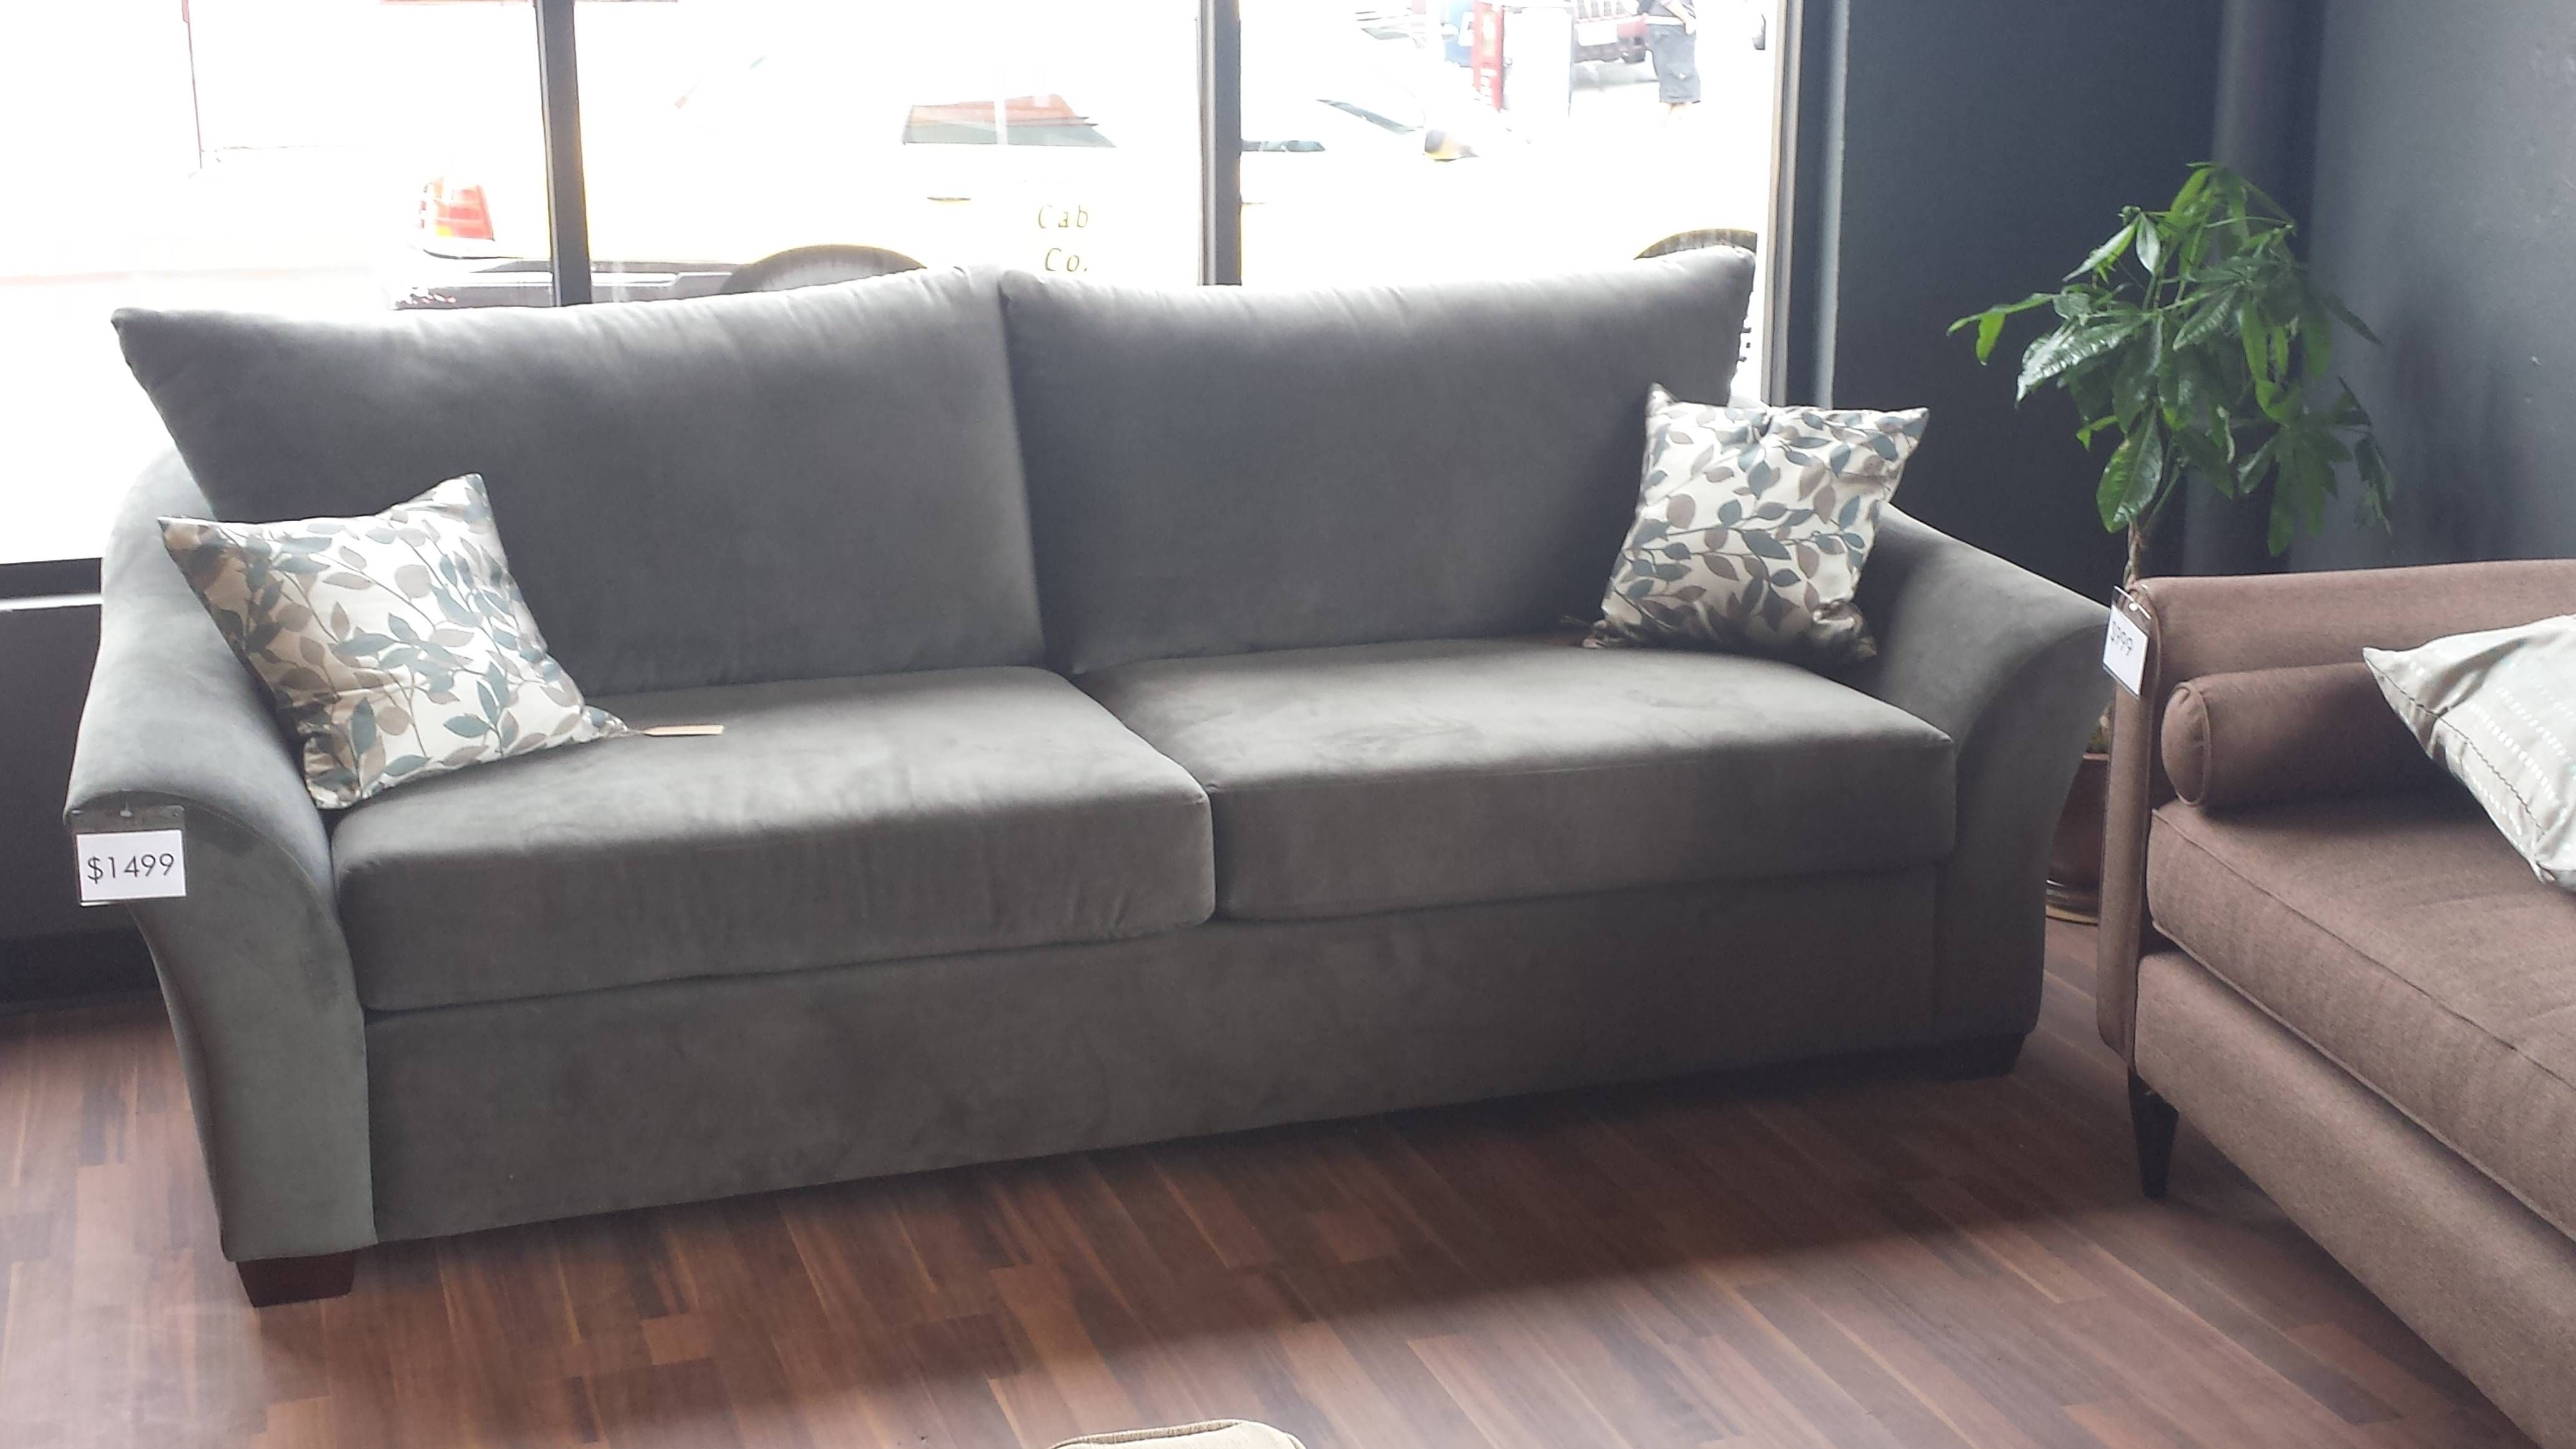 Decorating: Deep Seat Couches With Amazing Deep Sectional Sofa Inside Extra Wide Sectional Sofas (View 13 of 30)